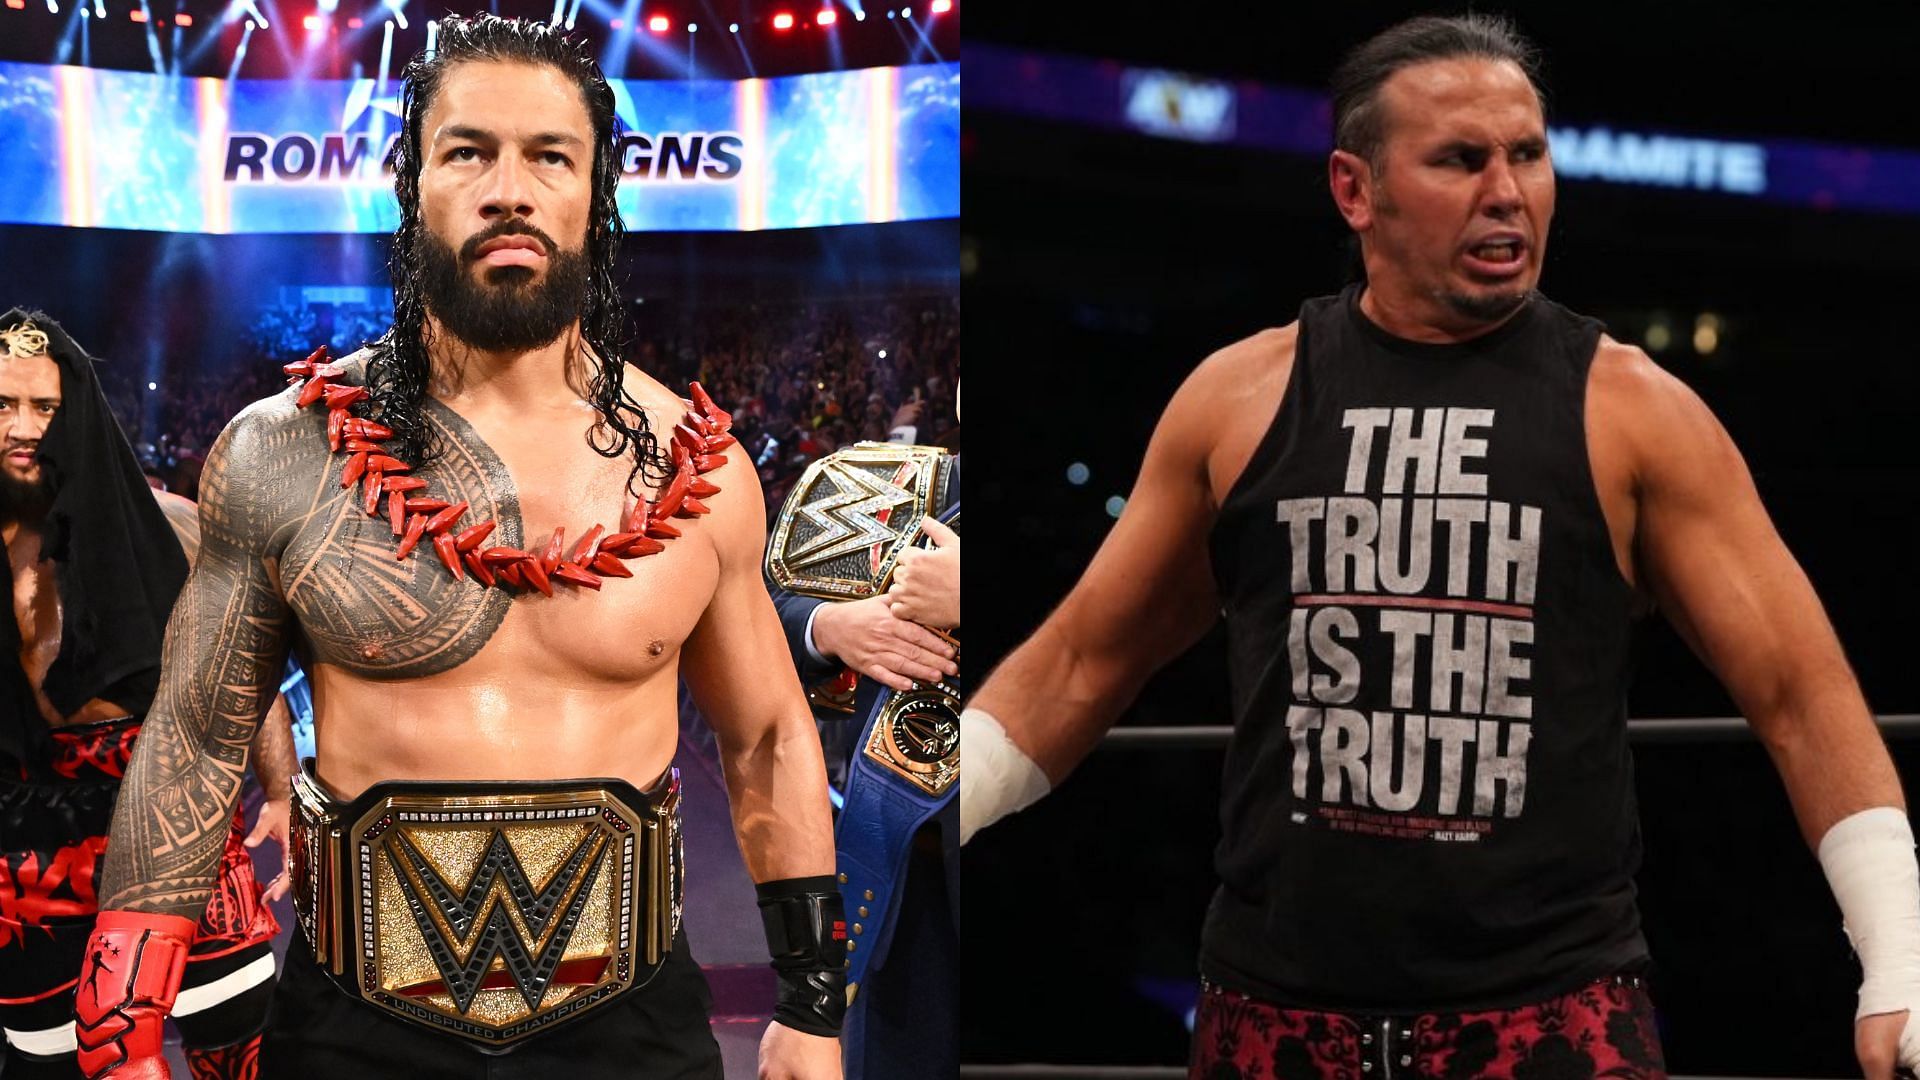 Will Matt Hardy have accurately predicted Roman Reigns